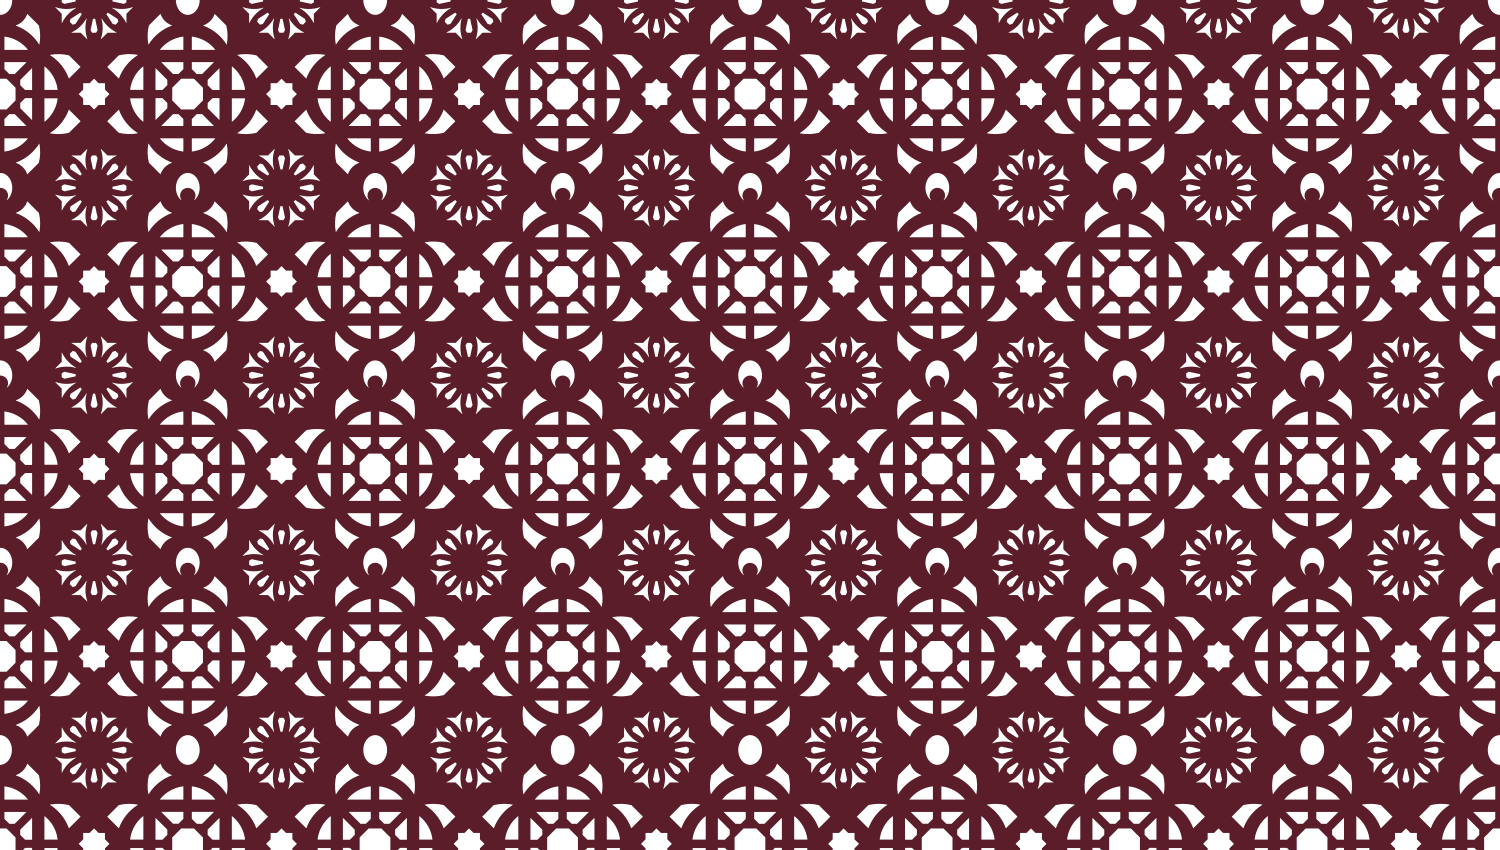 Parasoleil™ Casablanca© pattern displayed with a burgundy color overlay